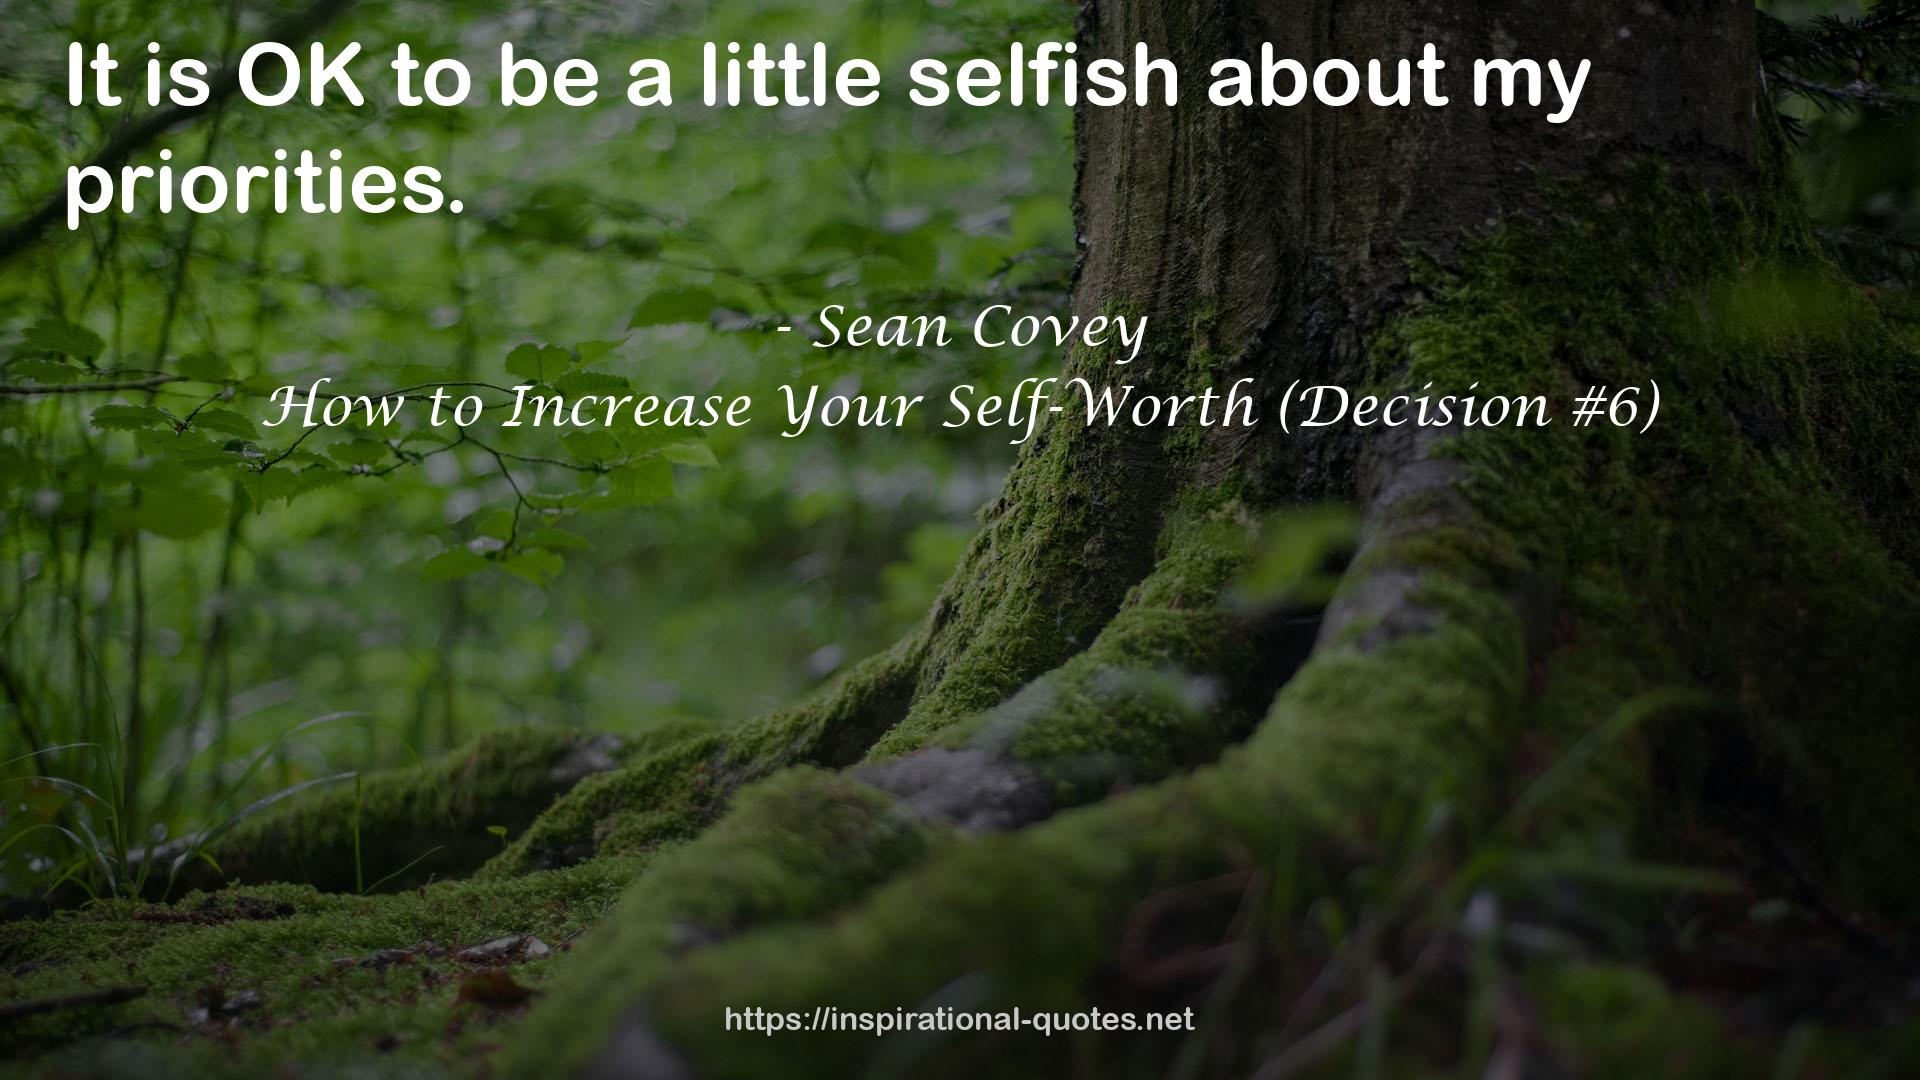 How to Increase Your Self-Worth (Decision #6) QUOTES